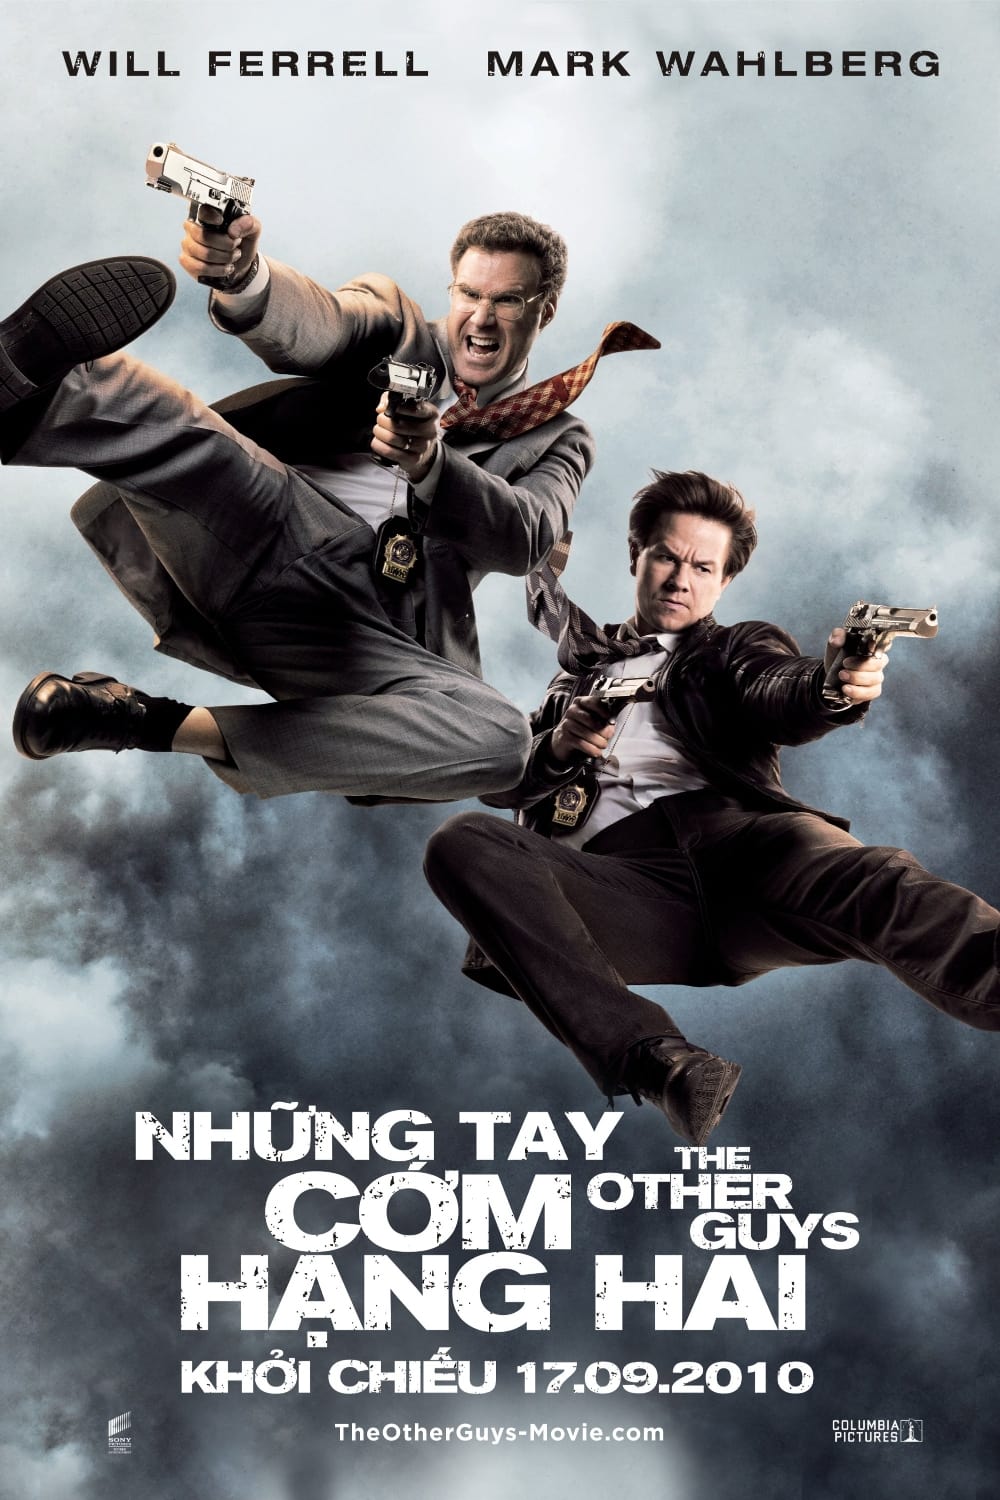 Những Tay Cớm Hạng Hai (The Other Guys) [2010]